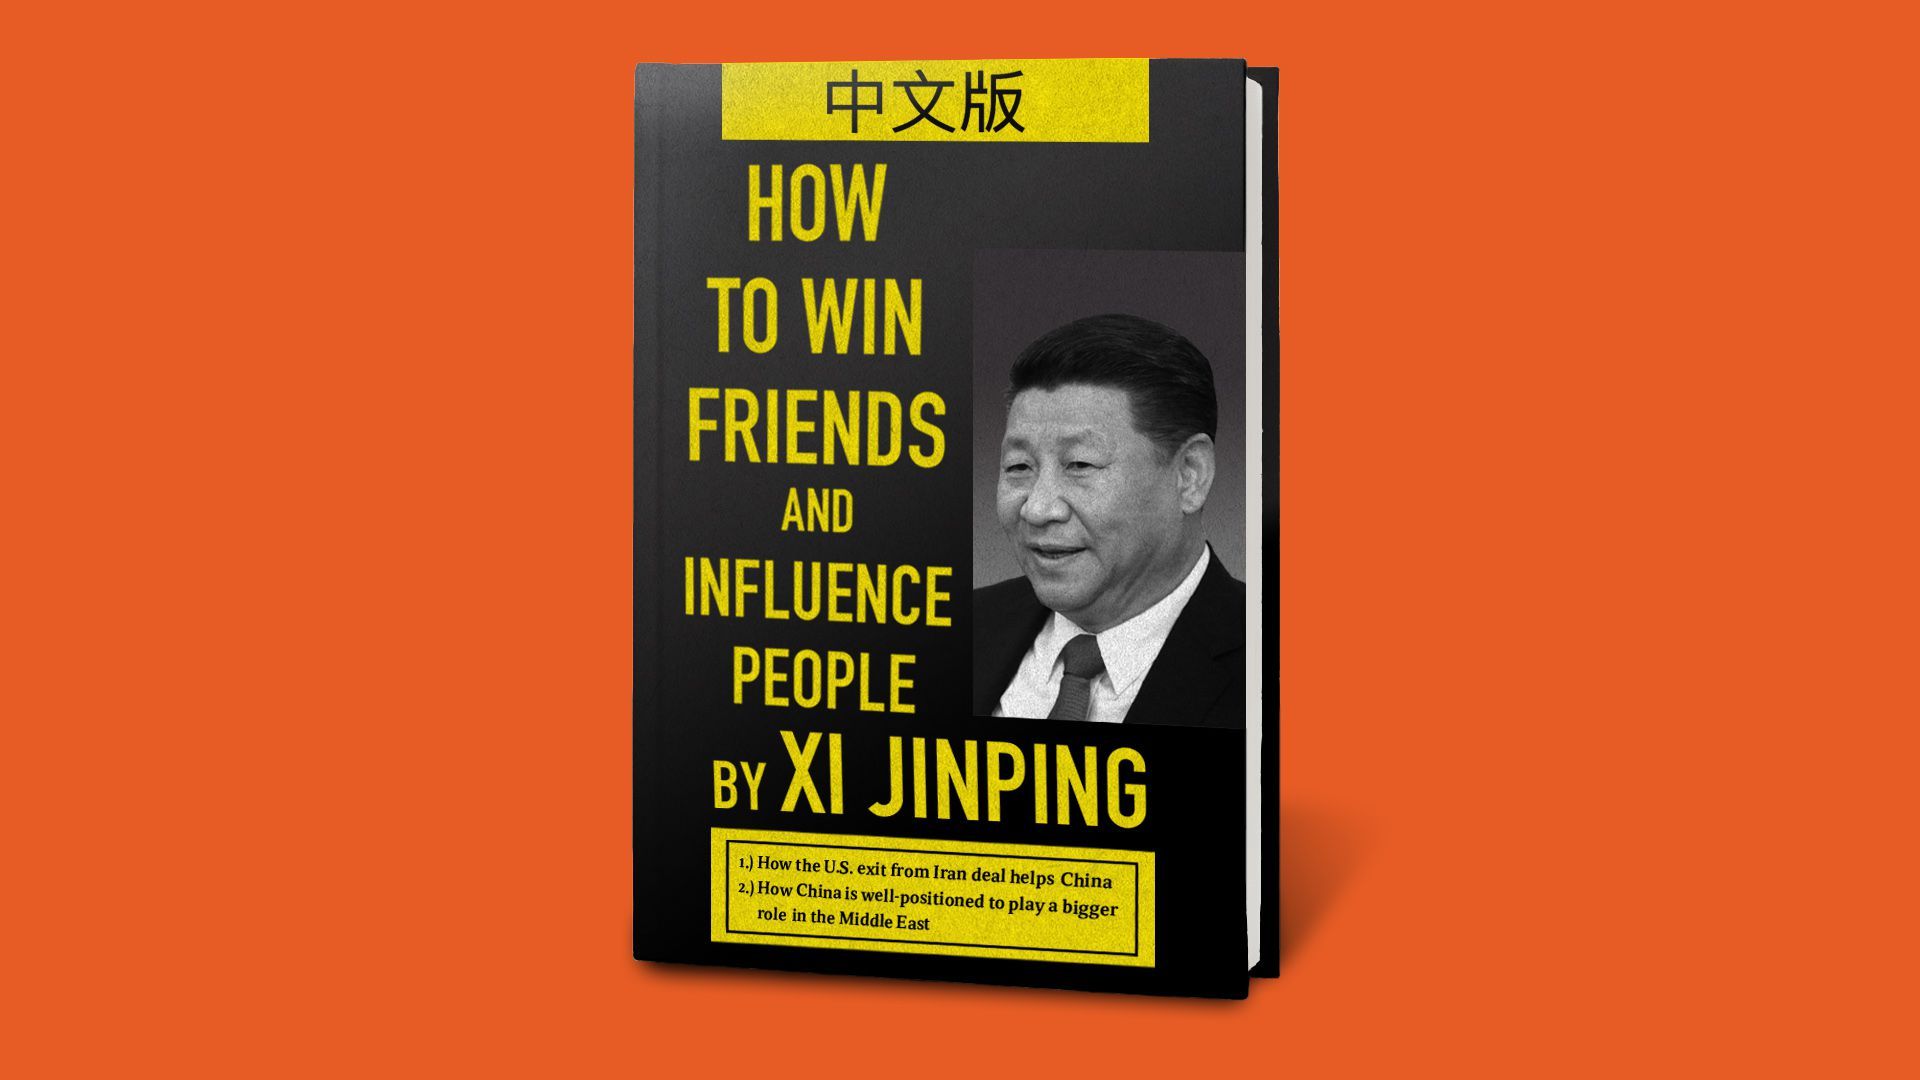 Xi Jinping on the cover of a fake book called "How to win friends and influence people' in an Axios illustration